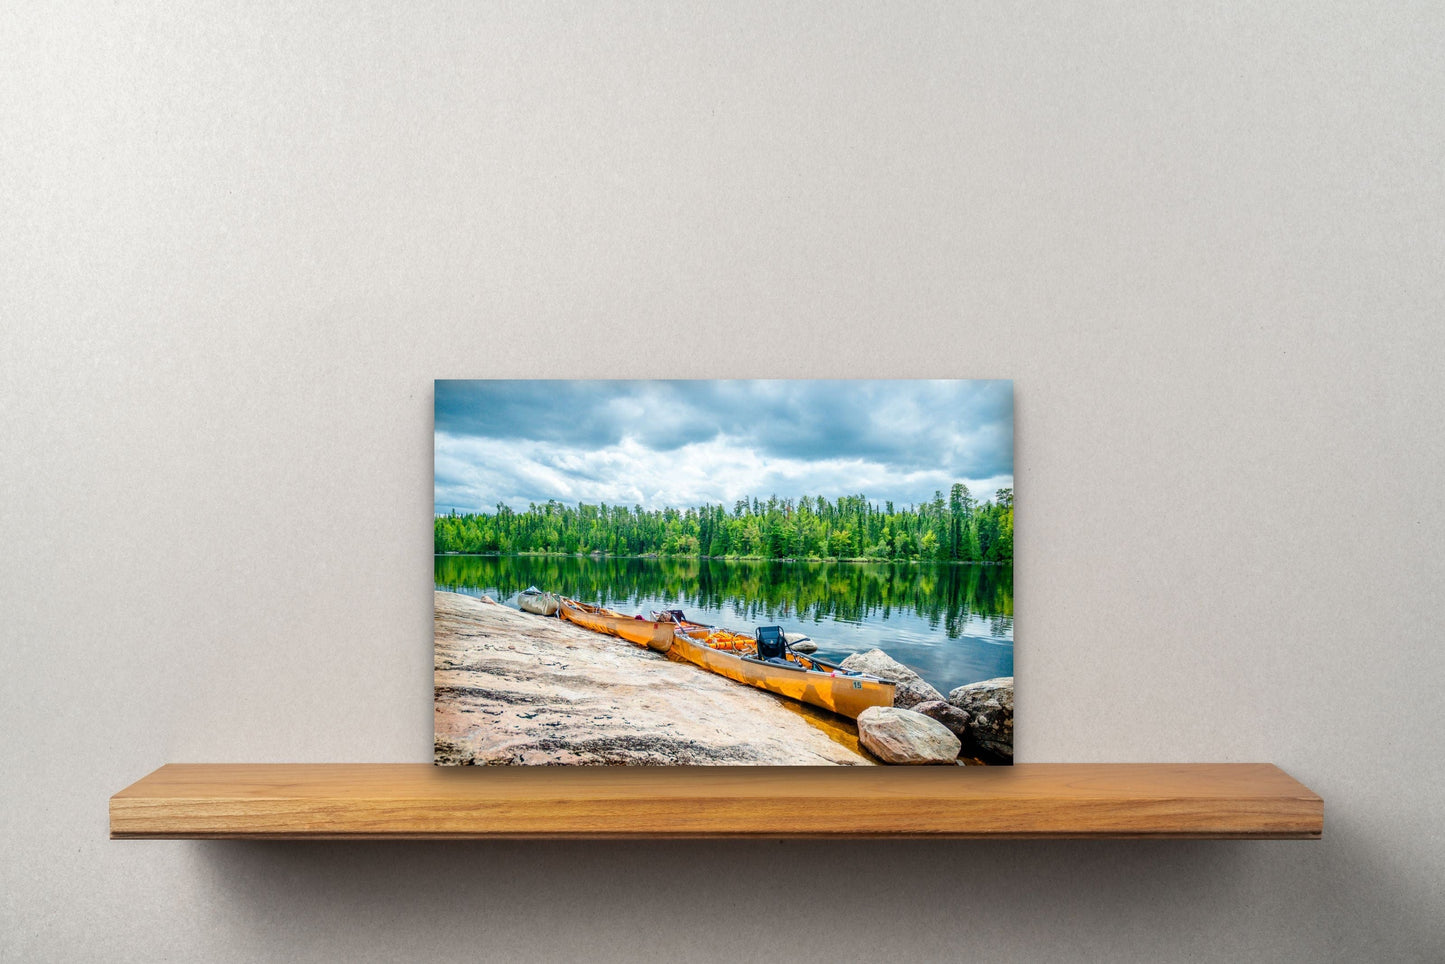 Wimberley Puzzle Company Posters, Prints, & Visual Artwork 10x15" Boundary Waters Voyageurs, Minnesota Wooden Art and Postcards